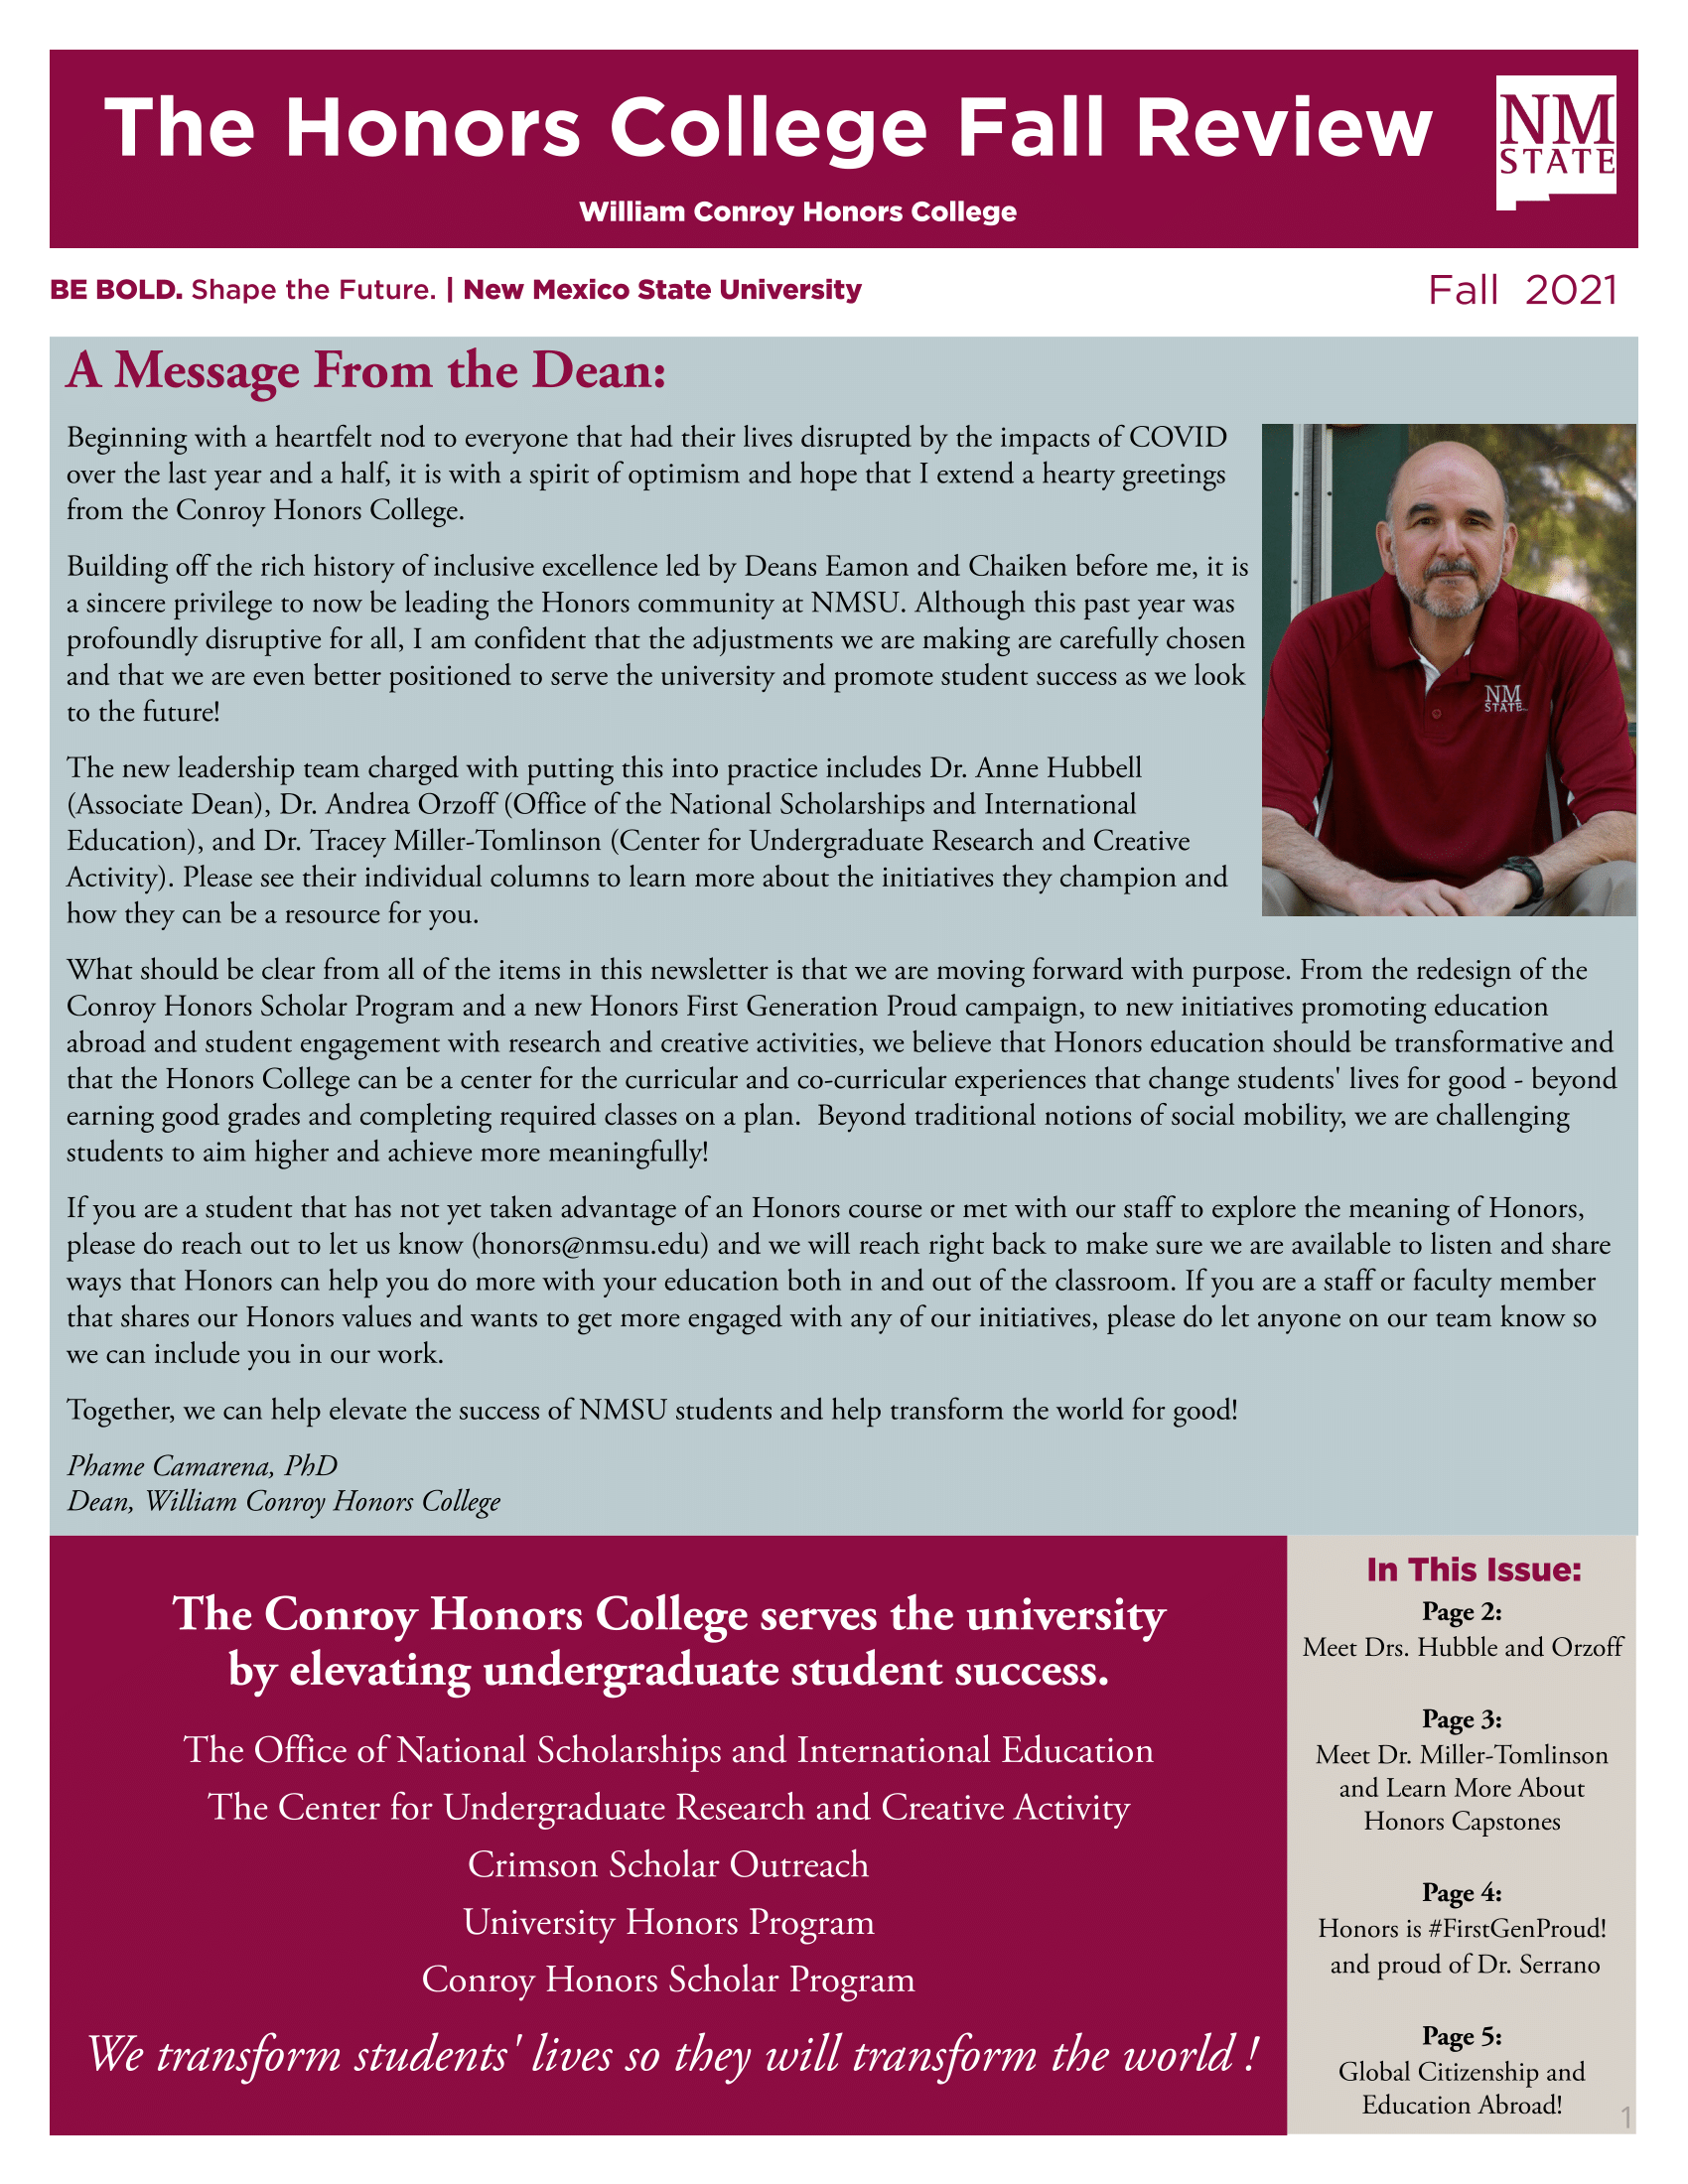 NMSU-Honors-College-Newsletter-Fall-2021-1.png